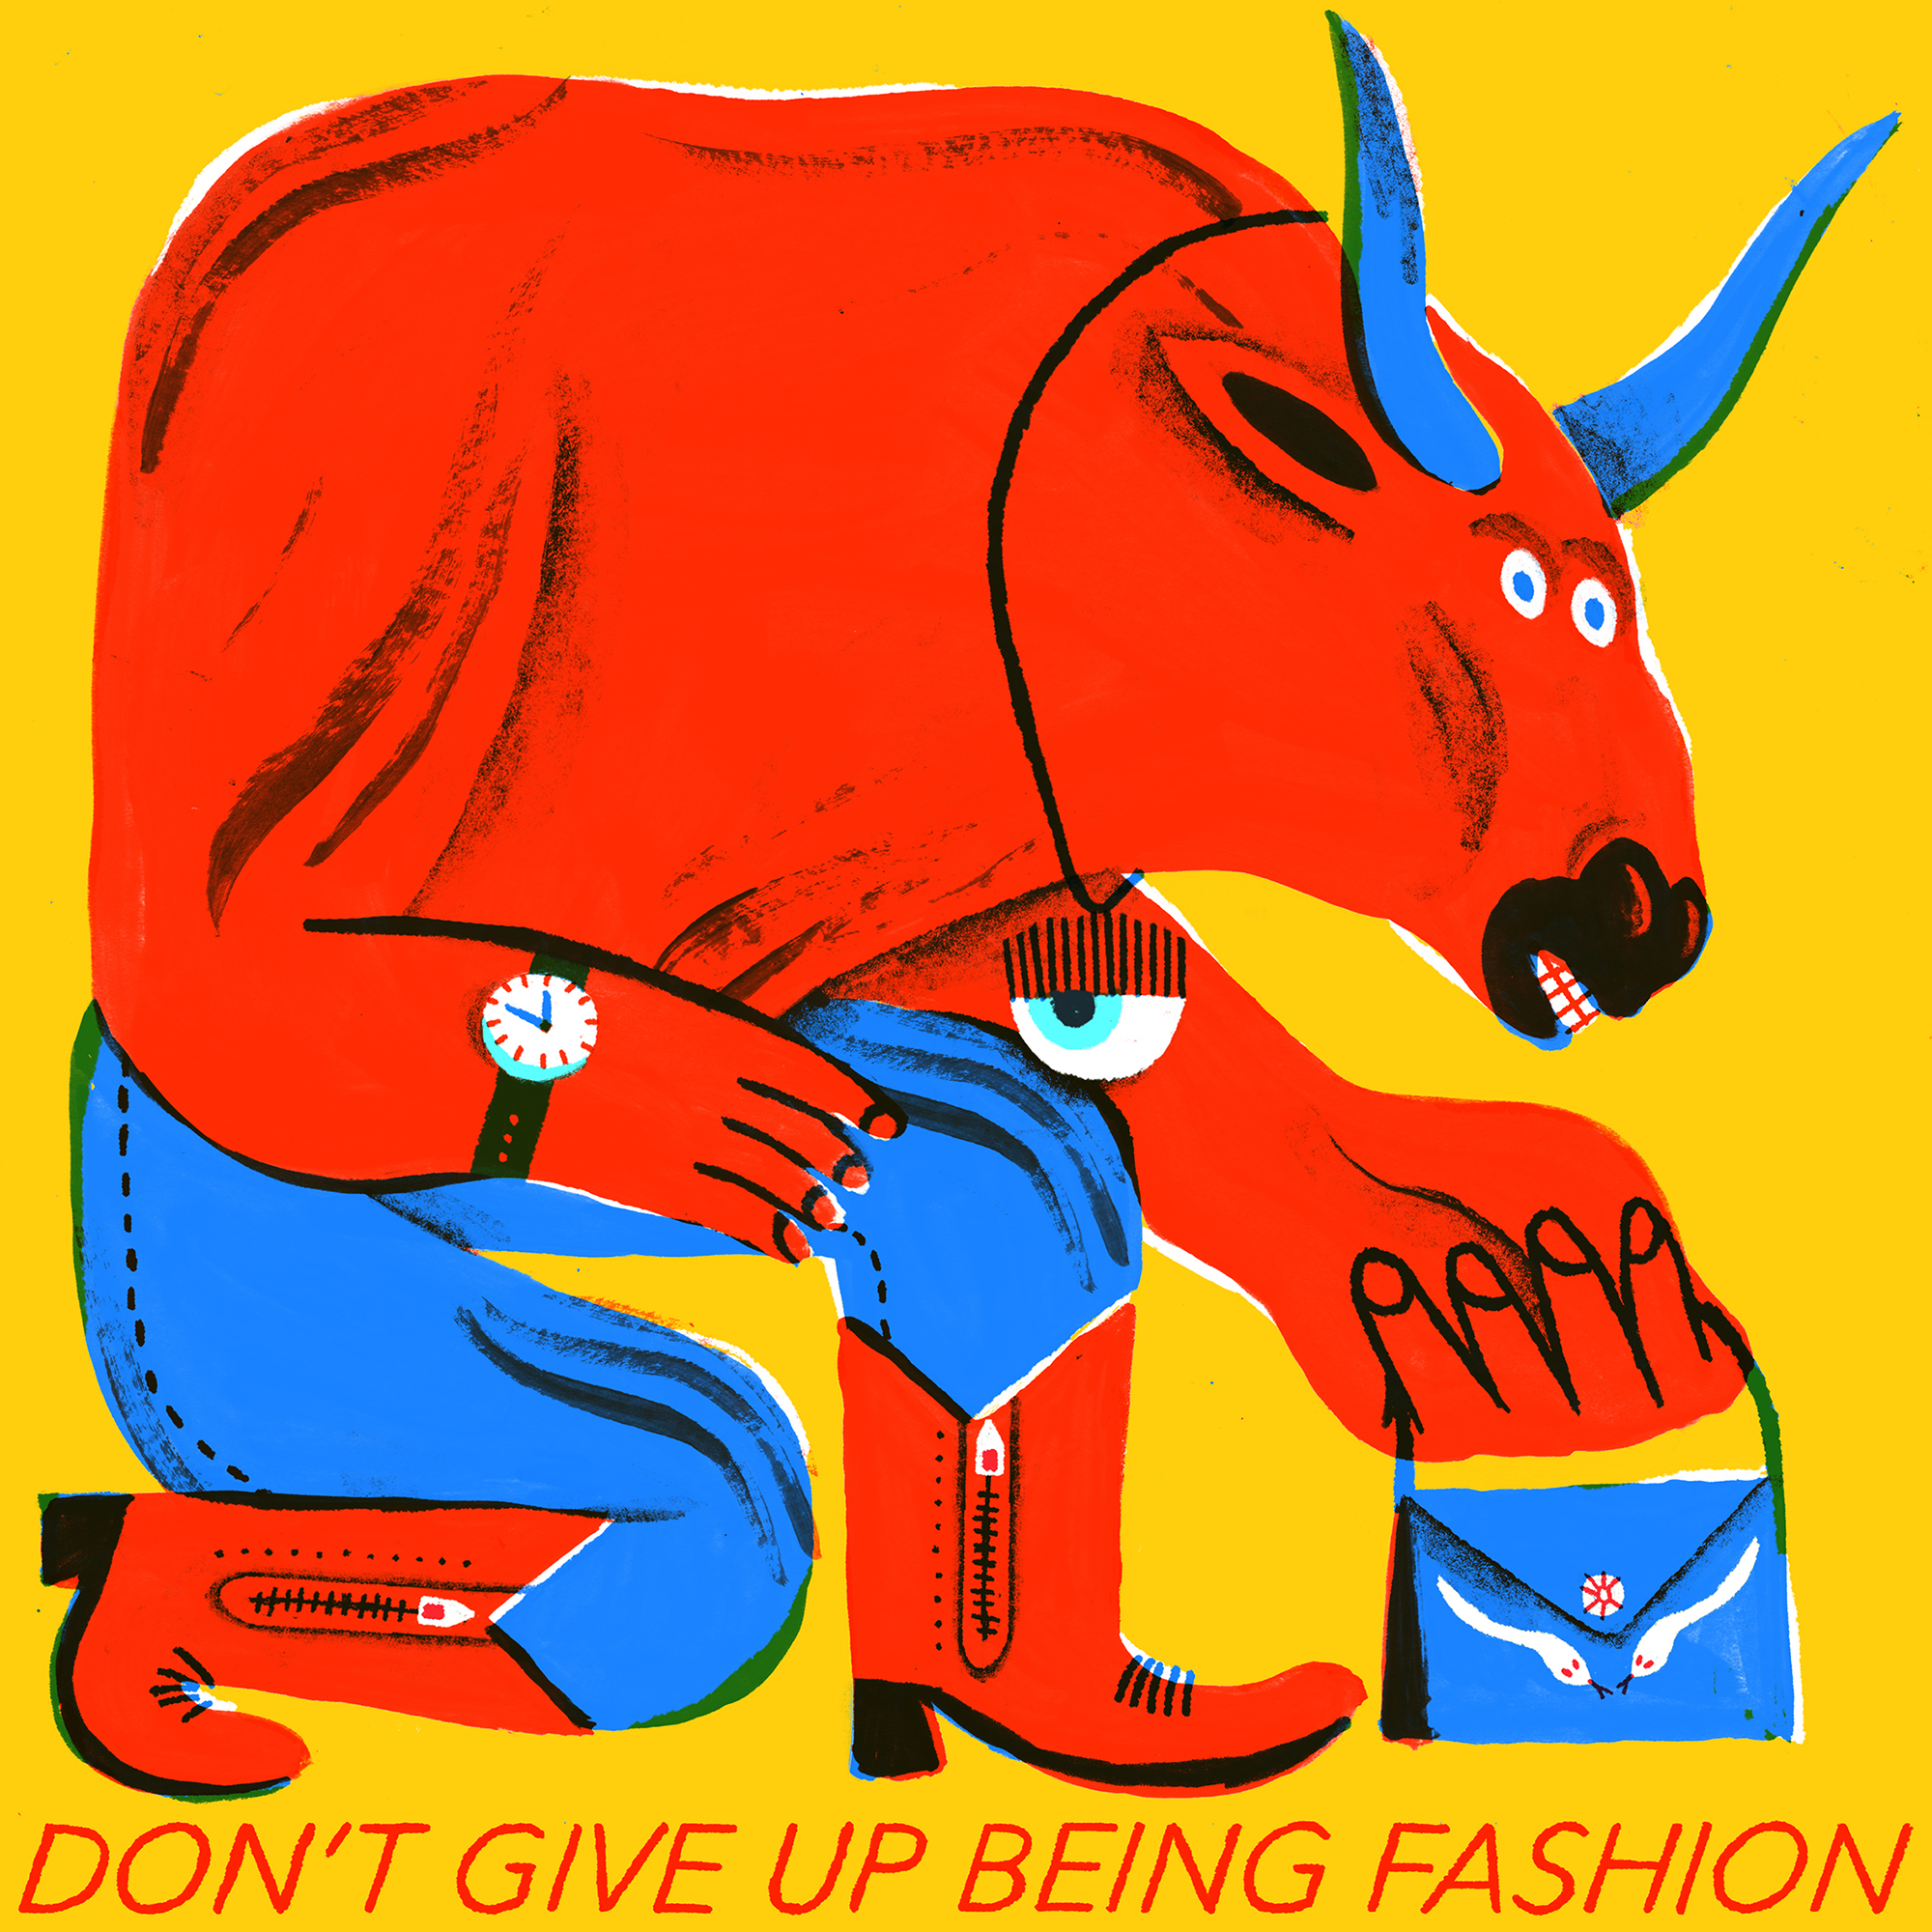 Alice Piaggio, Don't give up being fashion